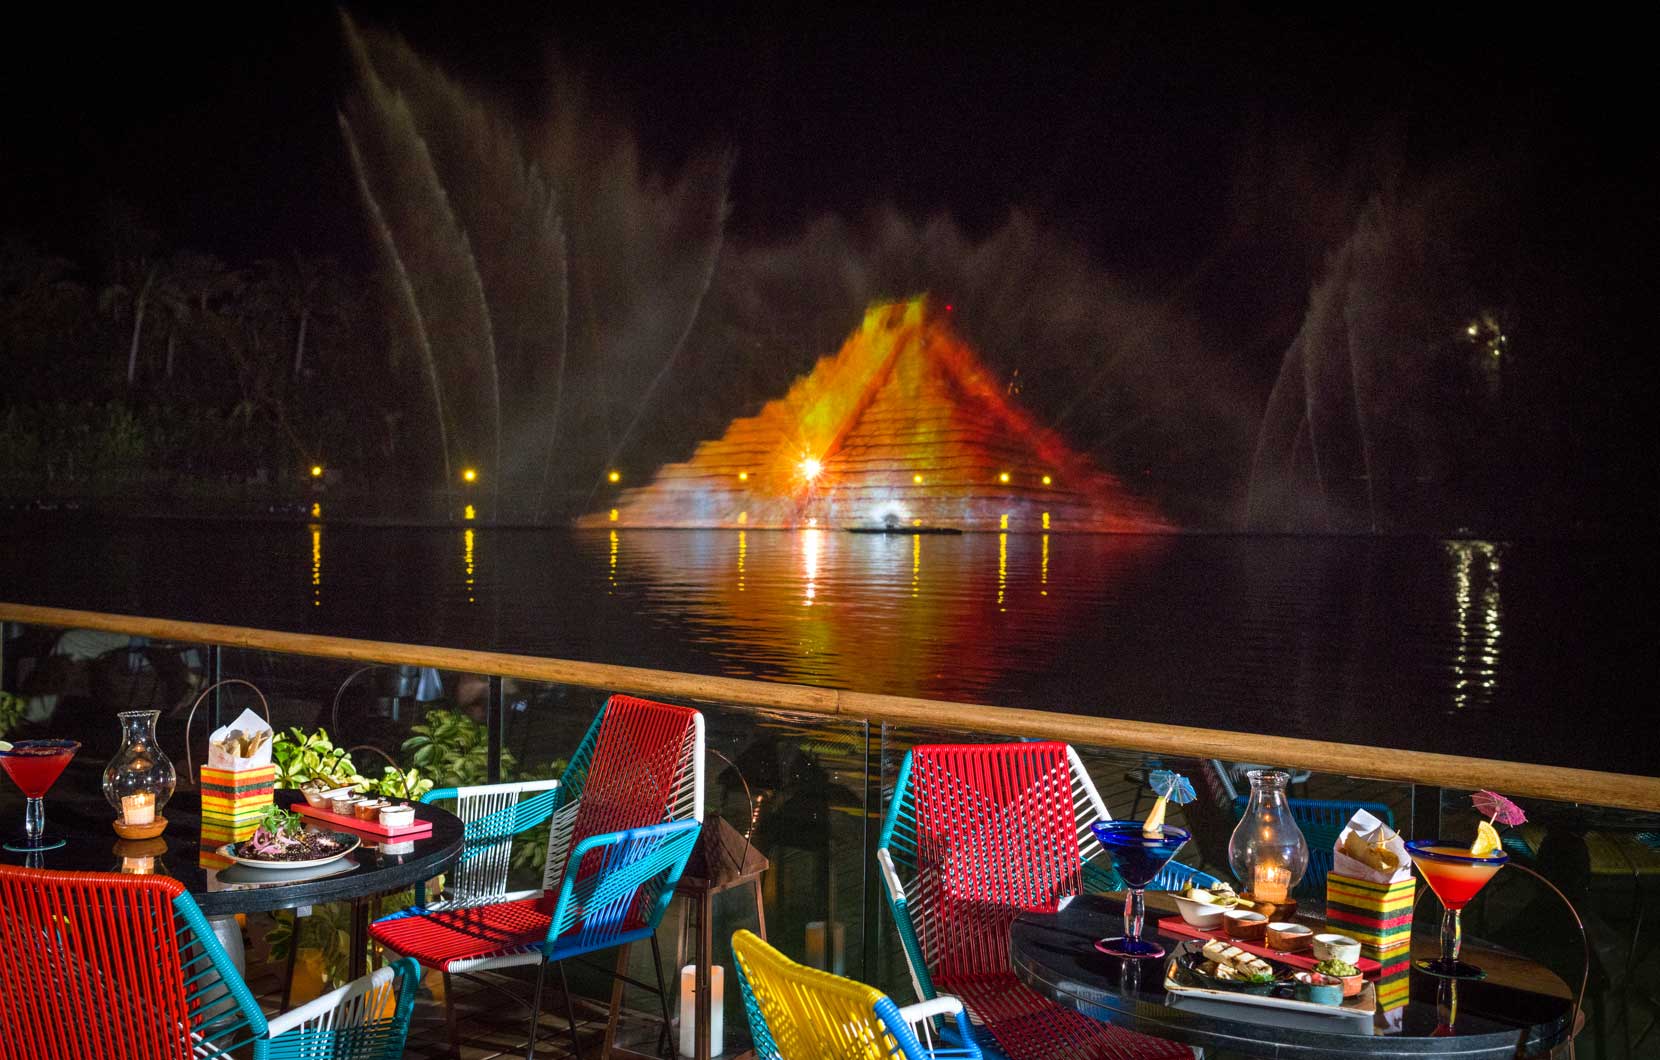 Take in the spectacular show of water, music, and light designed to mesmerize all guests at Vidanta Nuevo Vallarta.